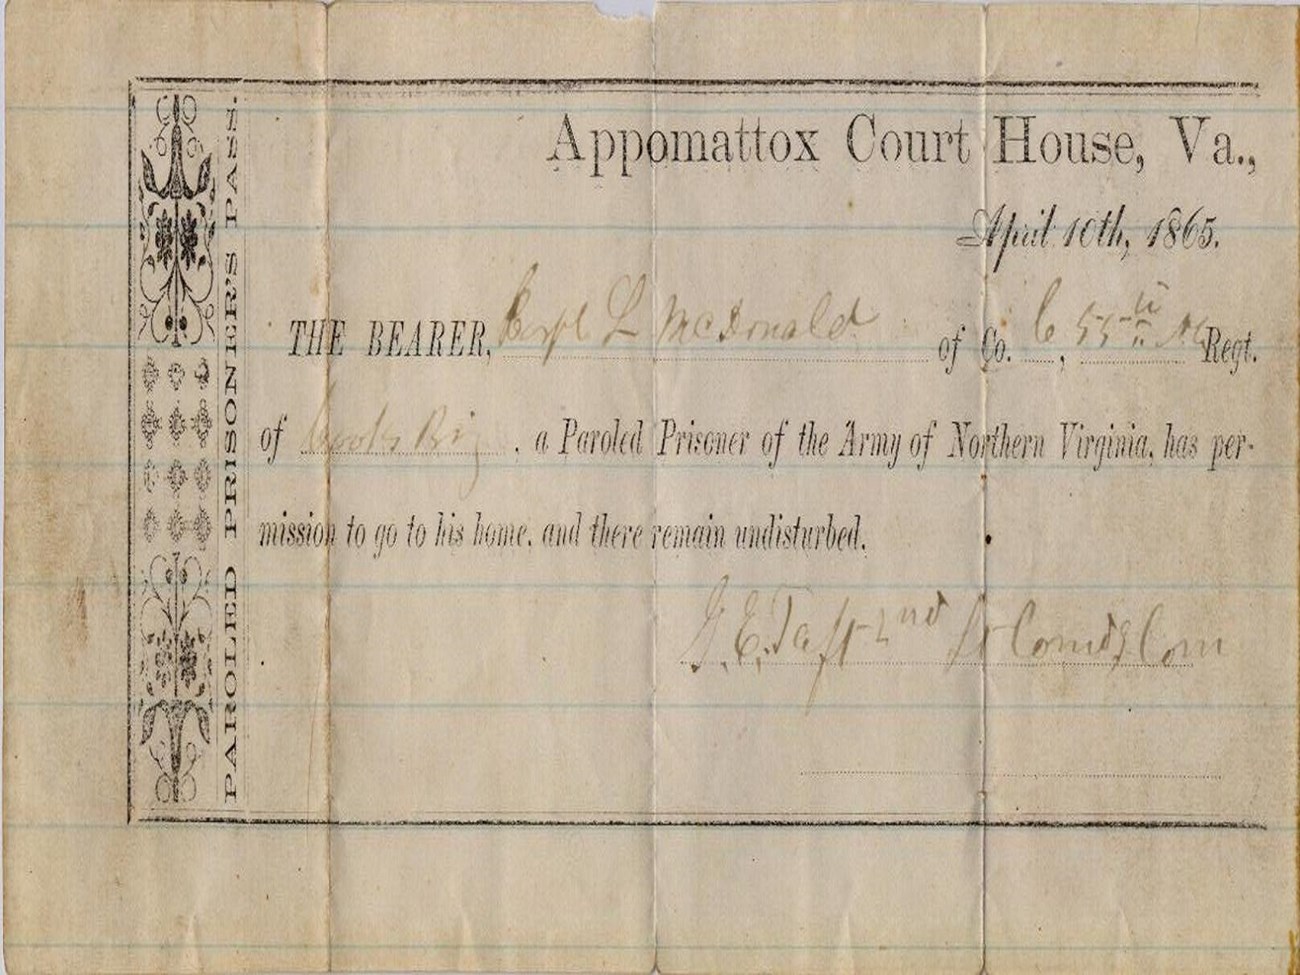 paper stamped with text reading "Appomattox Court House, VA April 10th, 1865. The BEARER, L. McDonald of company and regiment (text illegible) a paroled Prisoner of the Army of Northern Virginia, has permission to go to his home, and remain undisturbed.